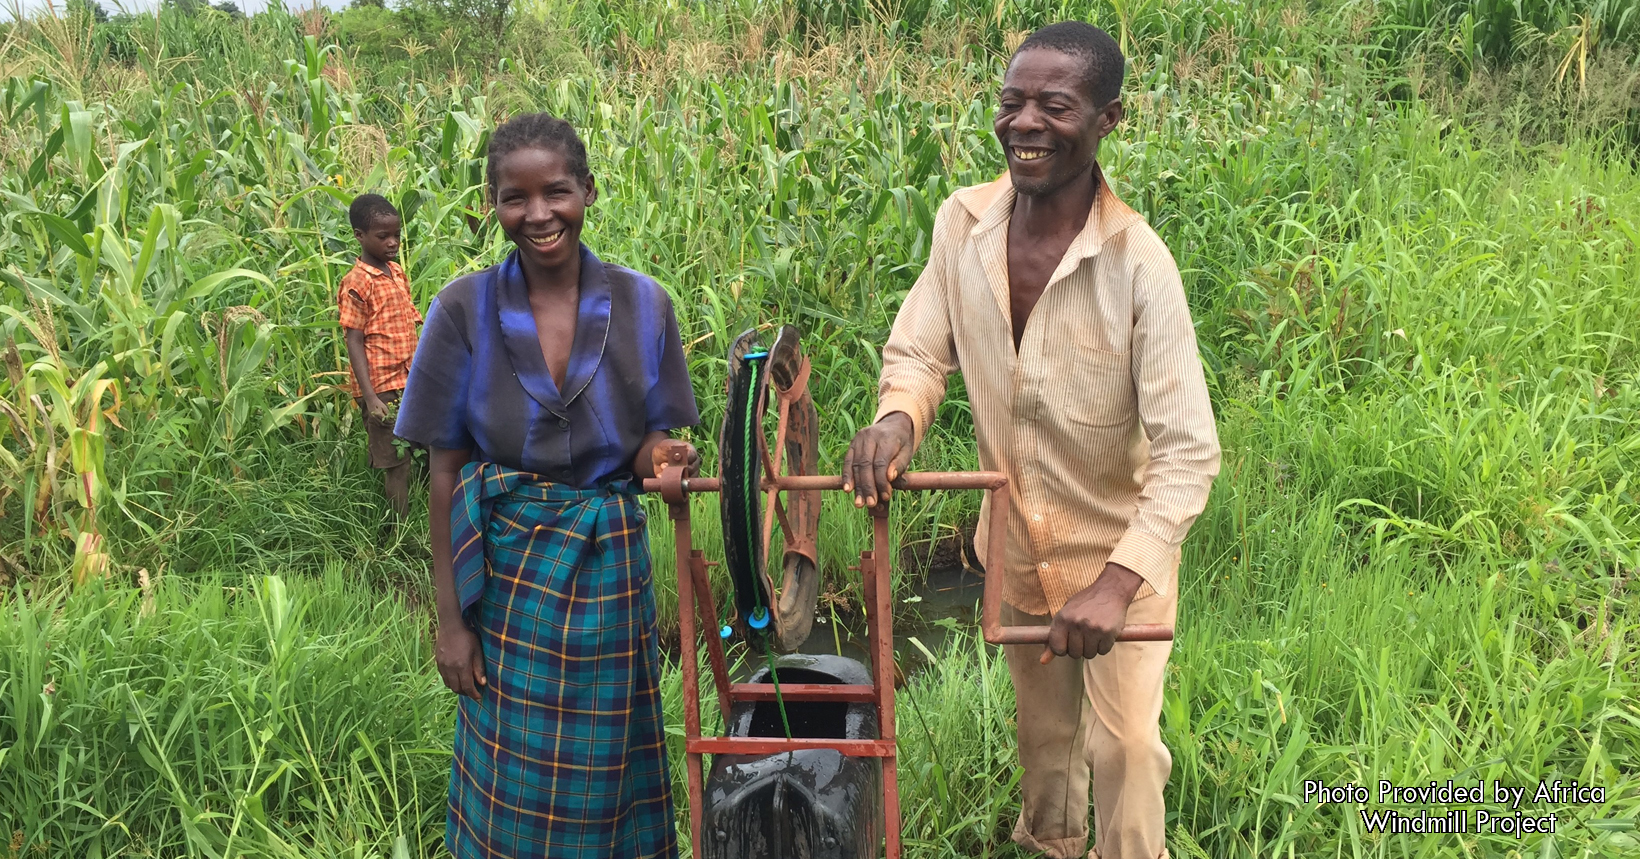 This hand crank pump was received by the Malaidza family in 2020. The pump allows them to garden during the dry season to keep their food supply sustainable.